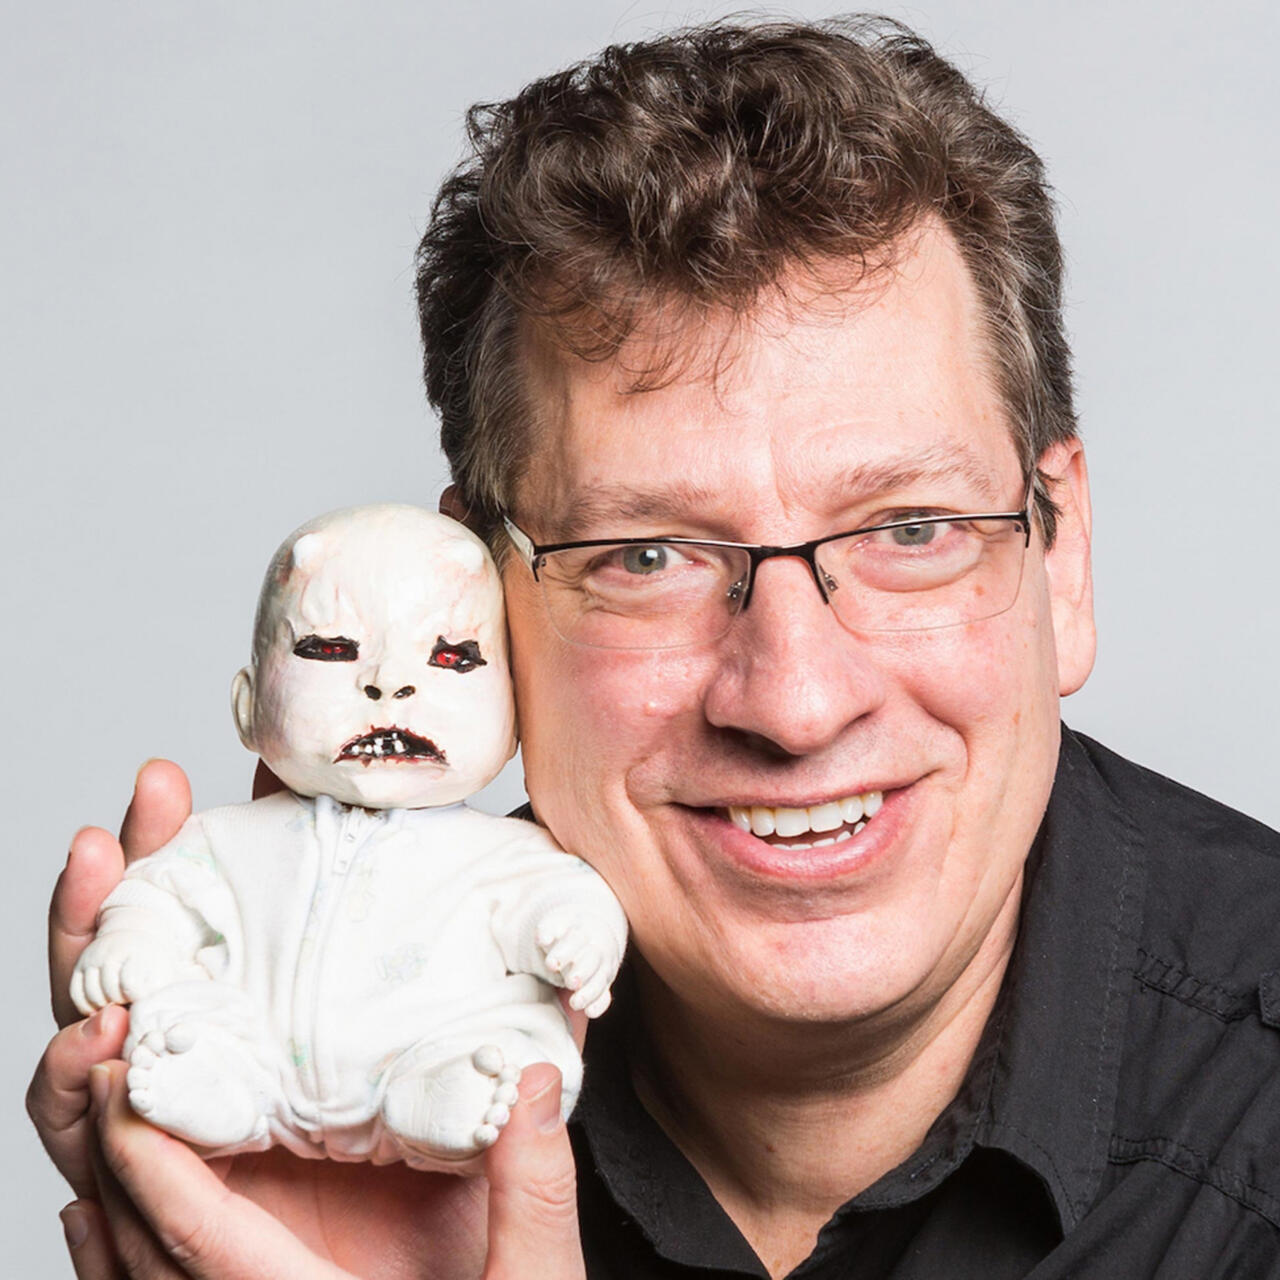 Rueff holding a demonic looking baby doll